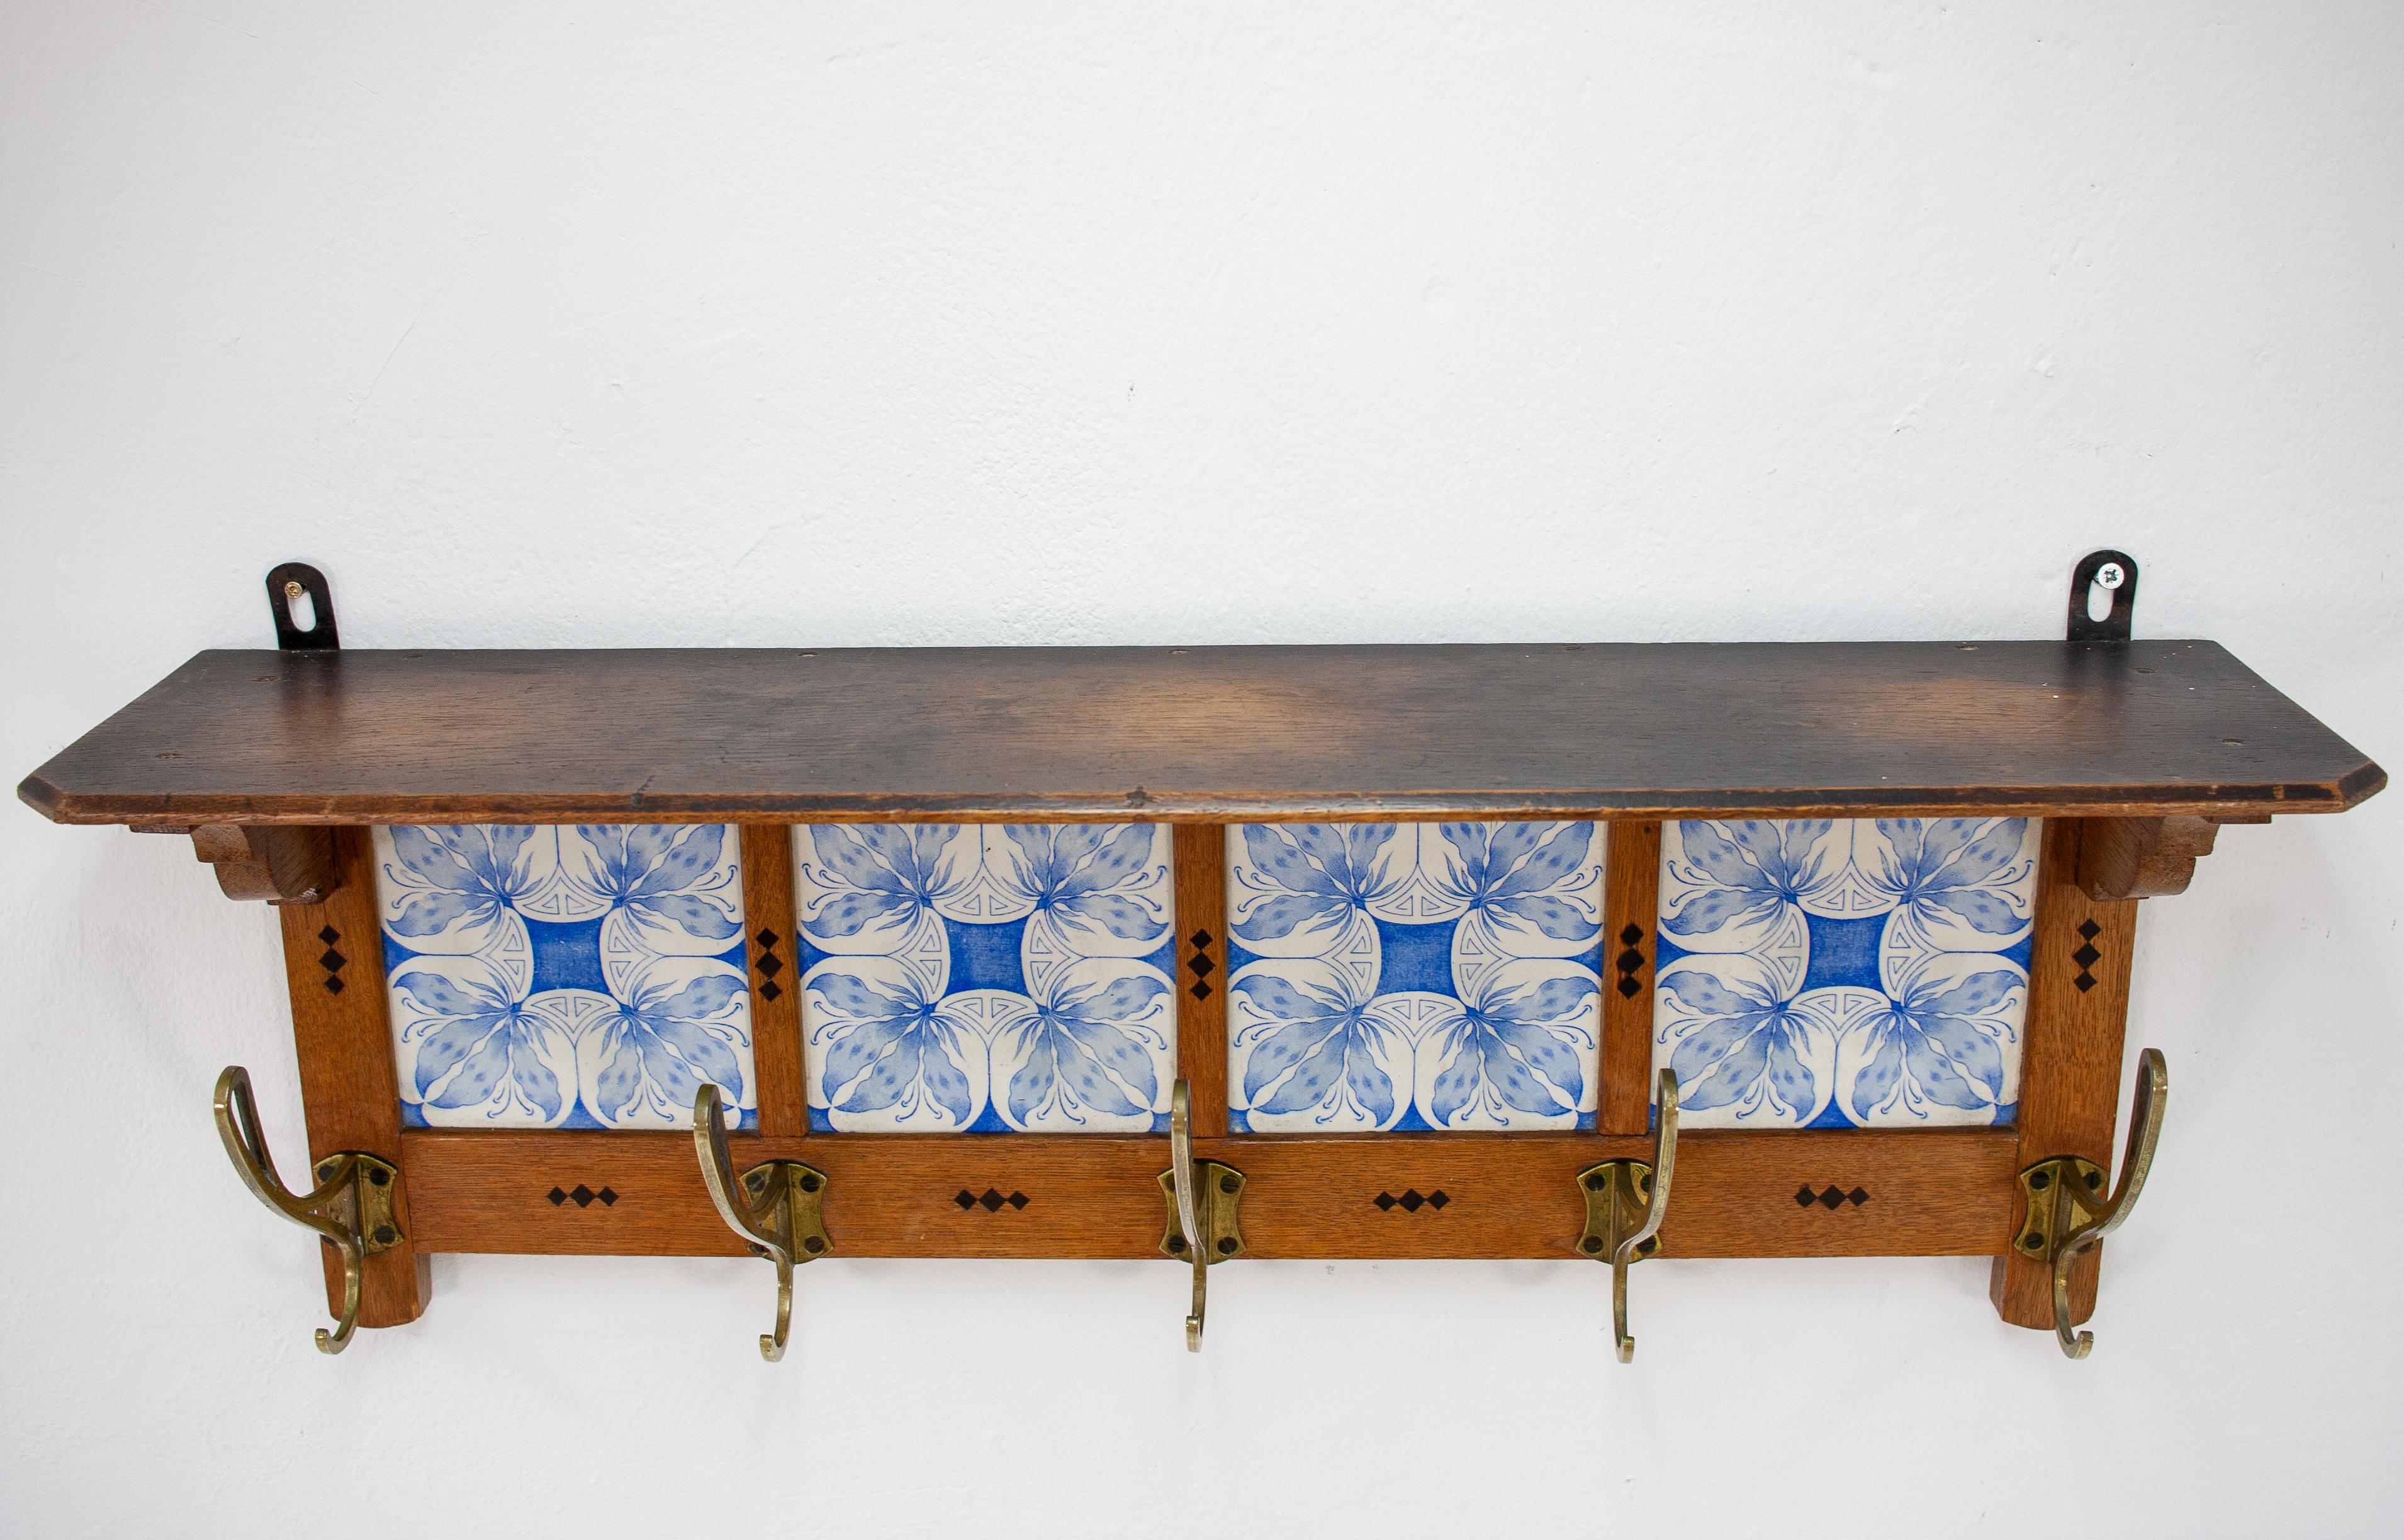 Art Nouveau wall coatrack in solid oak with the original tile inlays and five graceful brass hooks. Dutch, 1925.